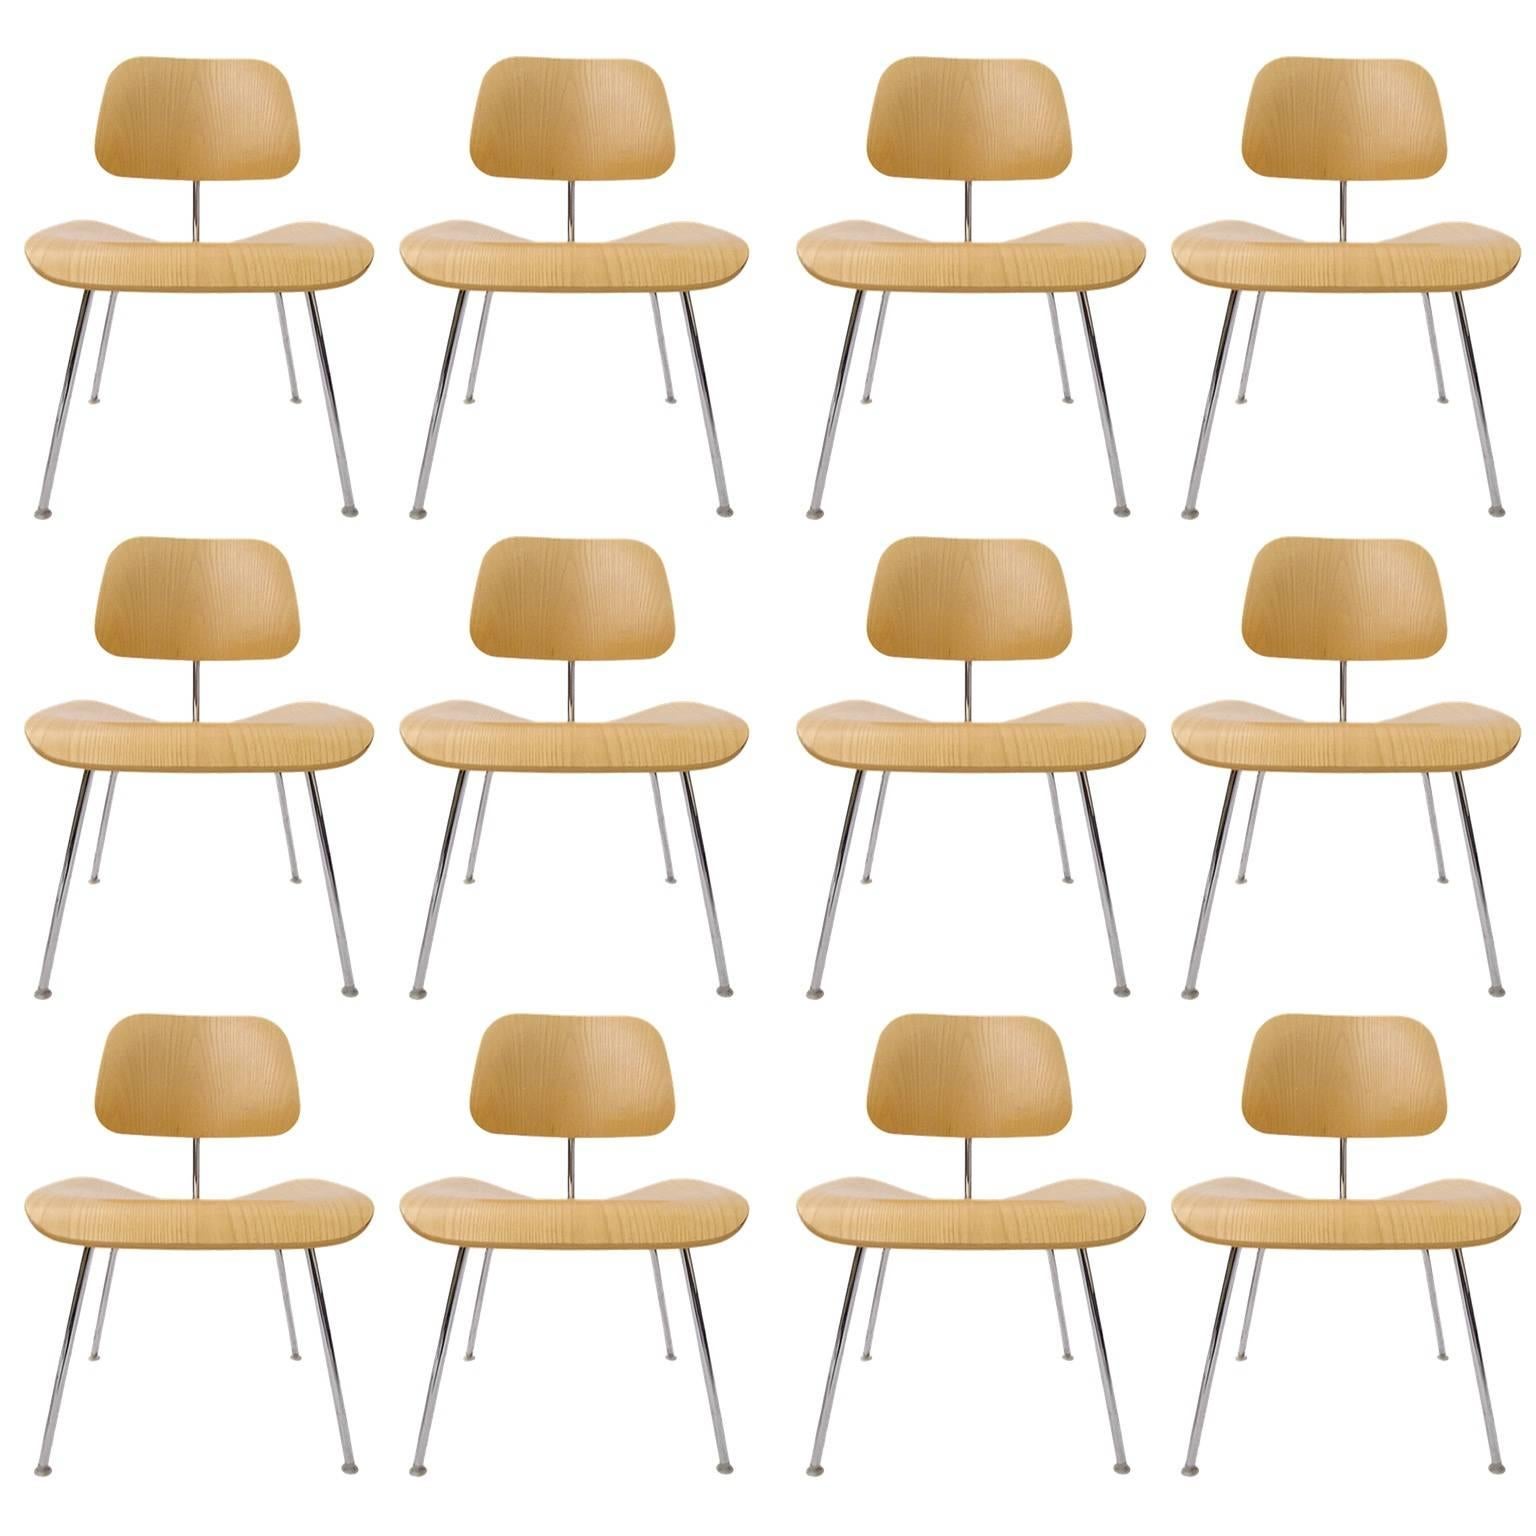 Many Charles Eames DCM Bent Plywood & Steel Chairs for Herman Miller White Ash